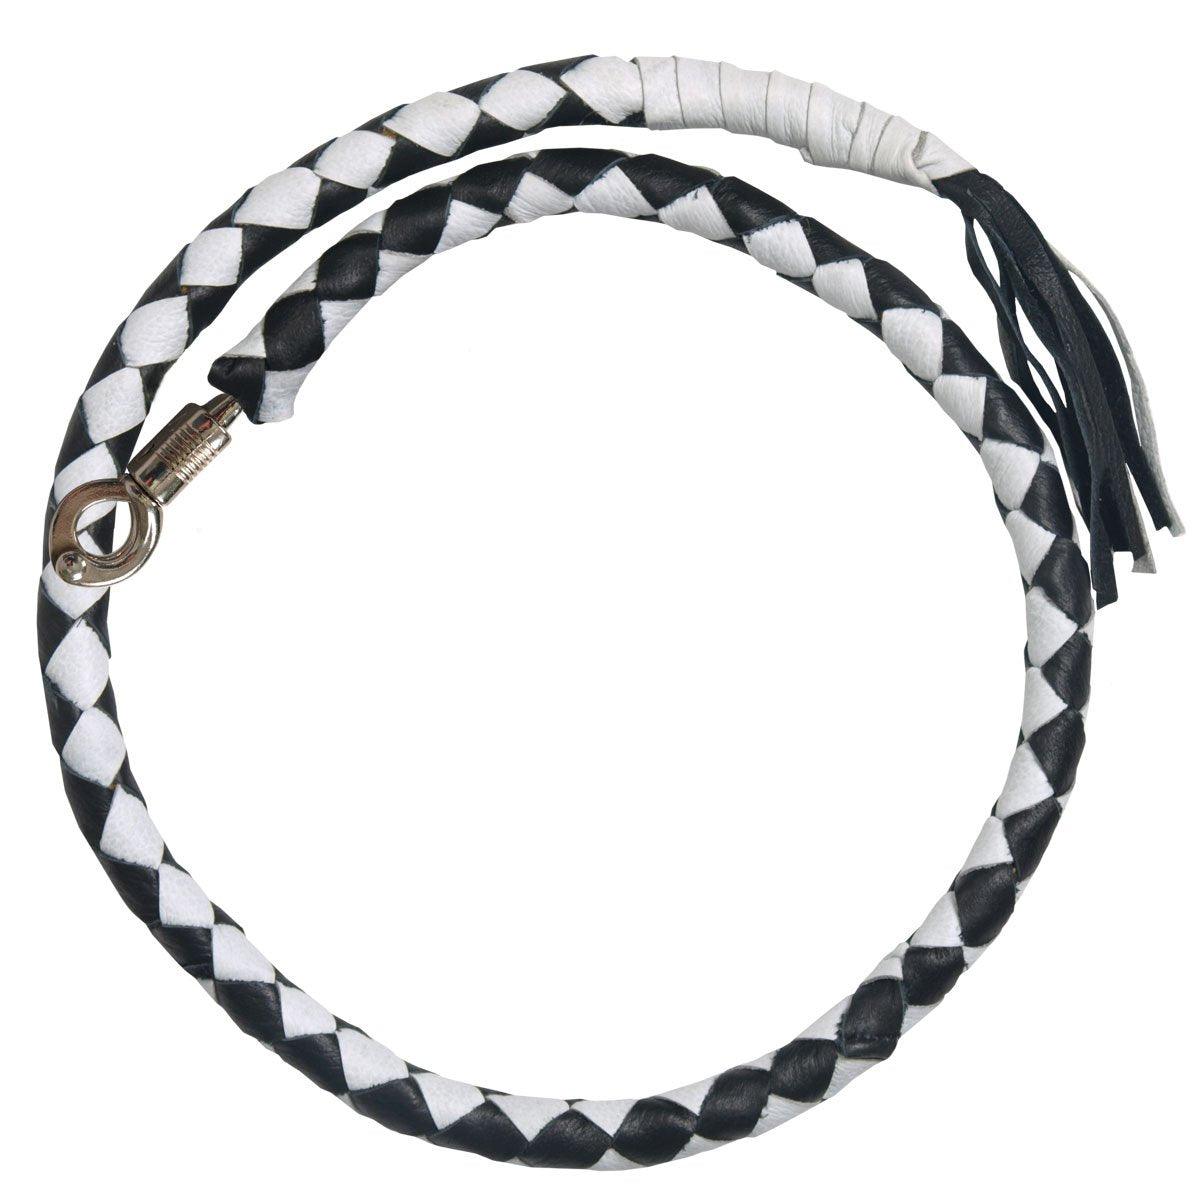 Hot Leathers "Get Back" Black And White Genuine Leather Whip - American Legend Rider